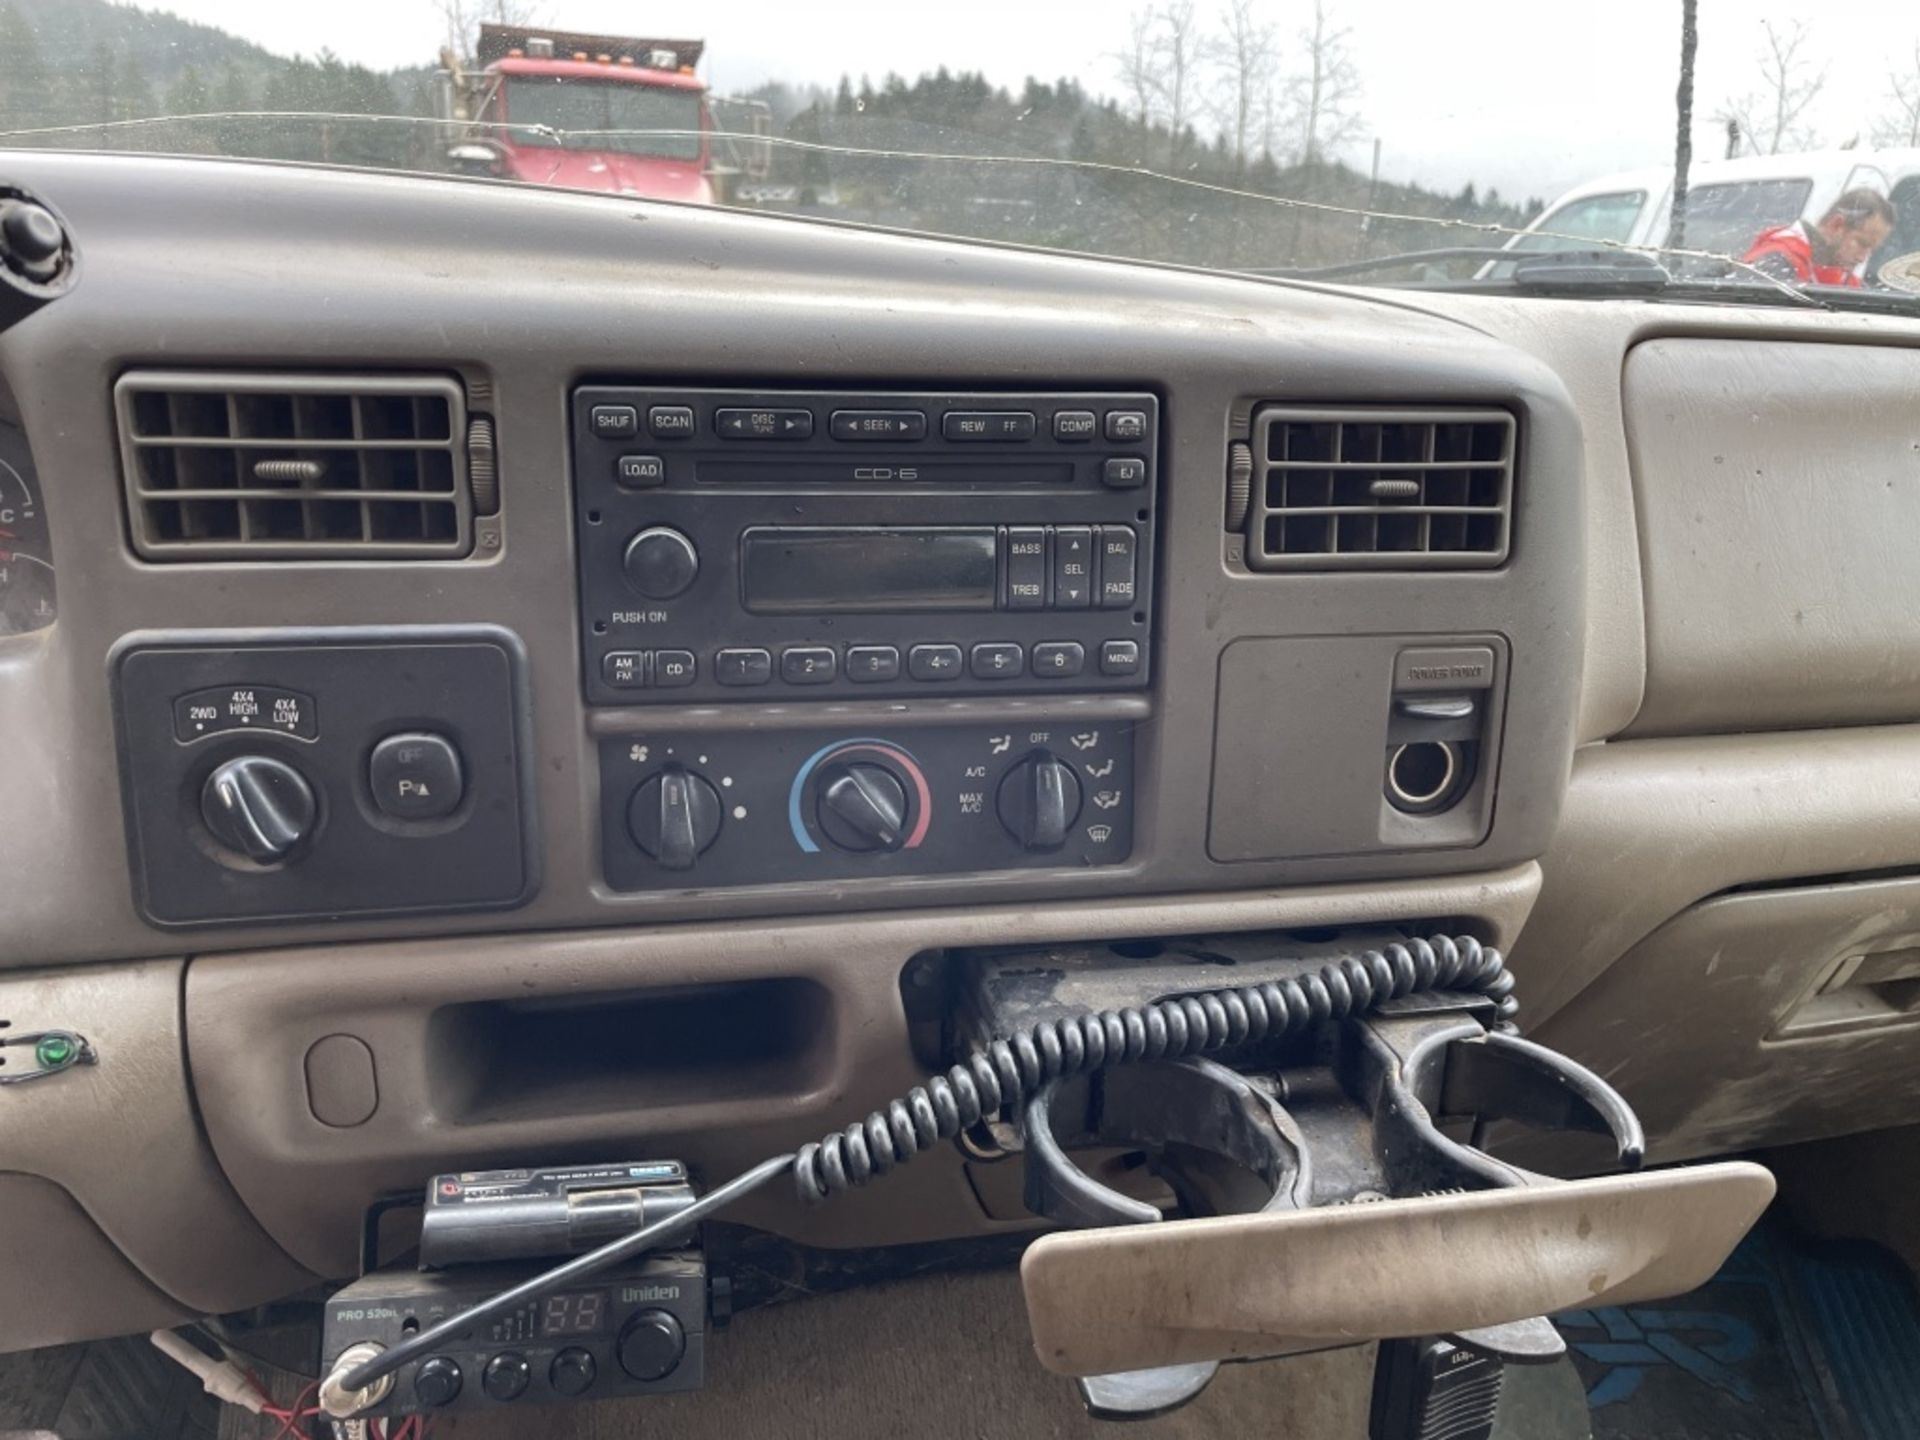 2002 Ford F350 SD 4x4 Crew Cab Pickup - Image 9 of 16